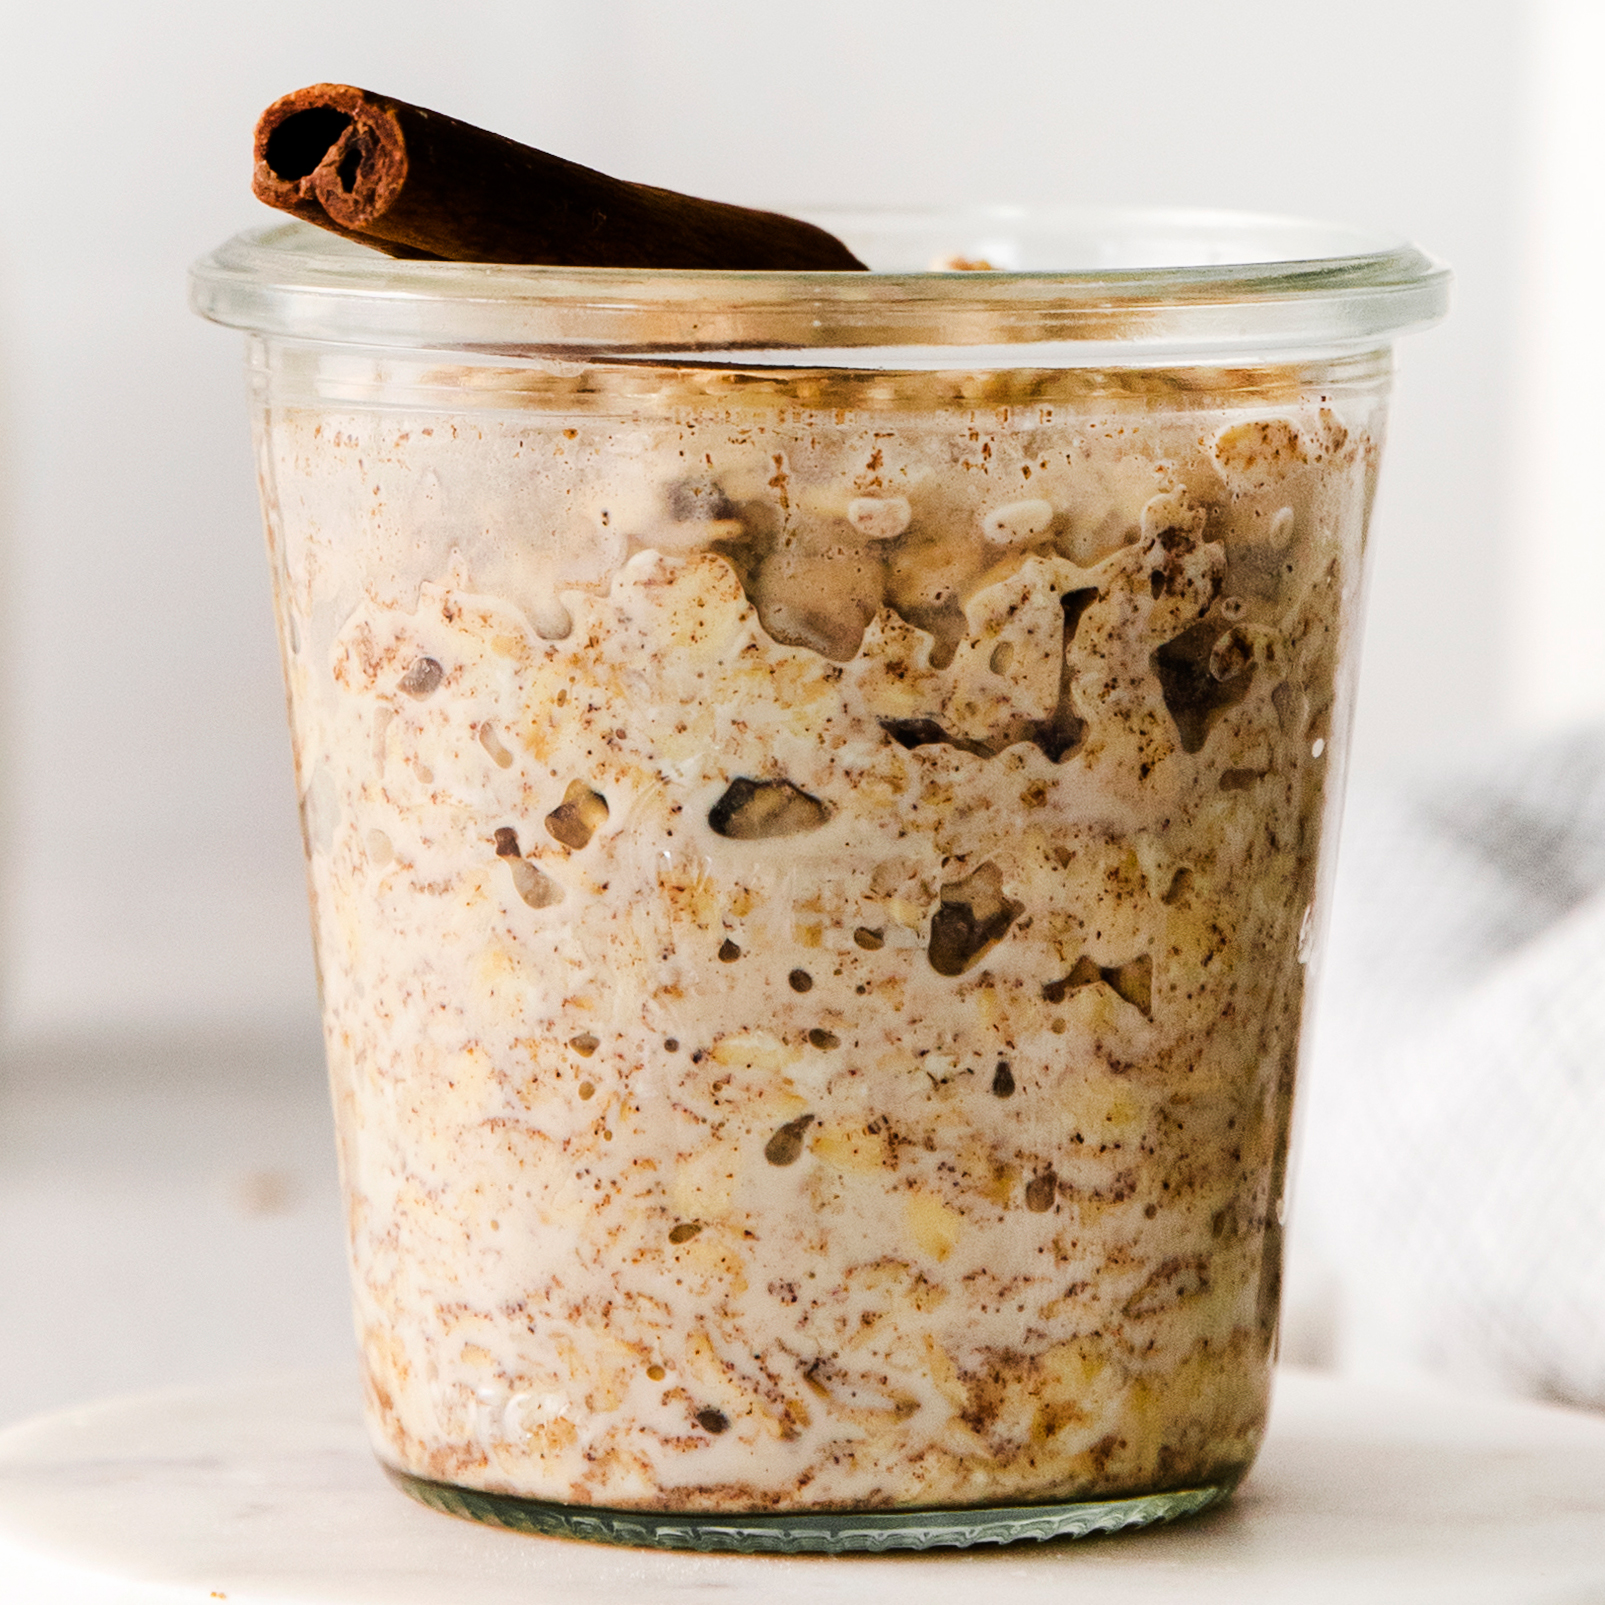 How to Make Overnight Oats (to Share with the Kids)